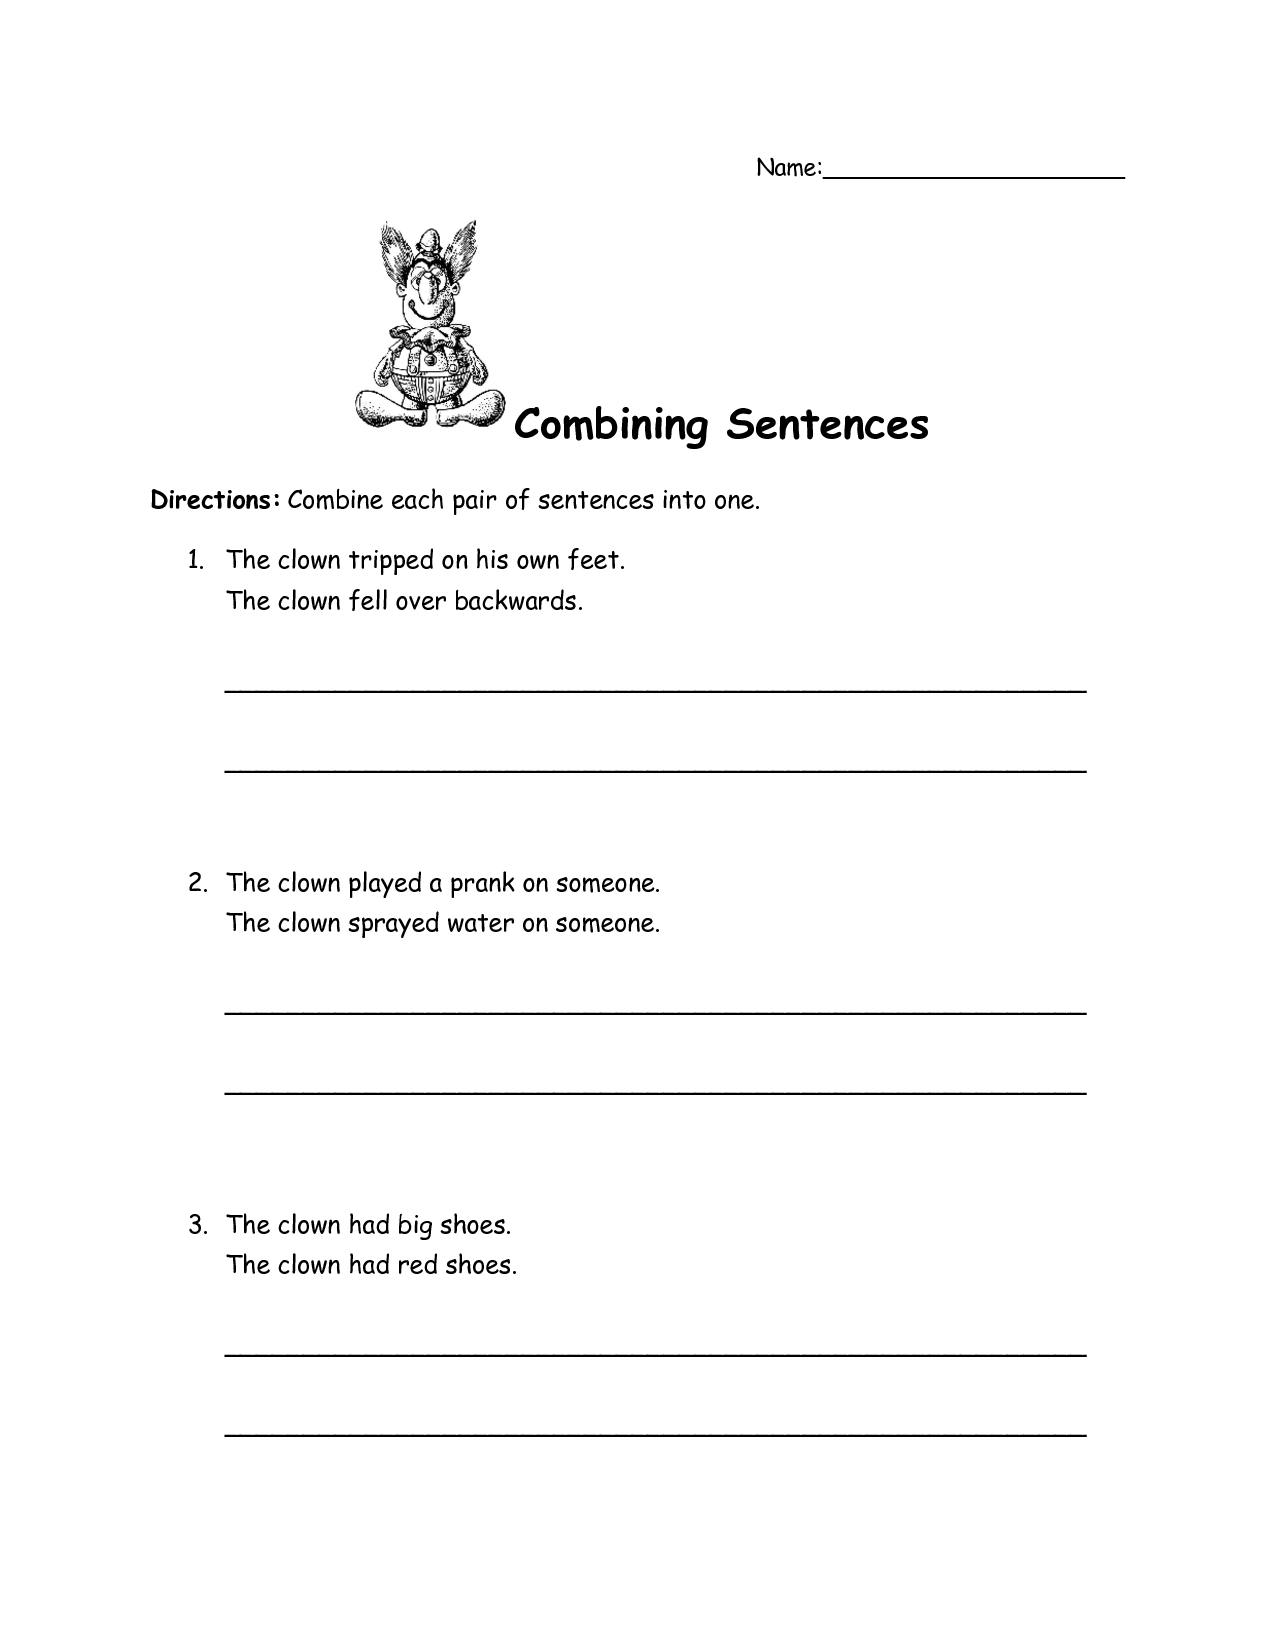 Combining Sentences with Conjunctions Worksheet Image